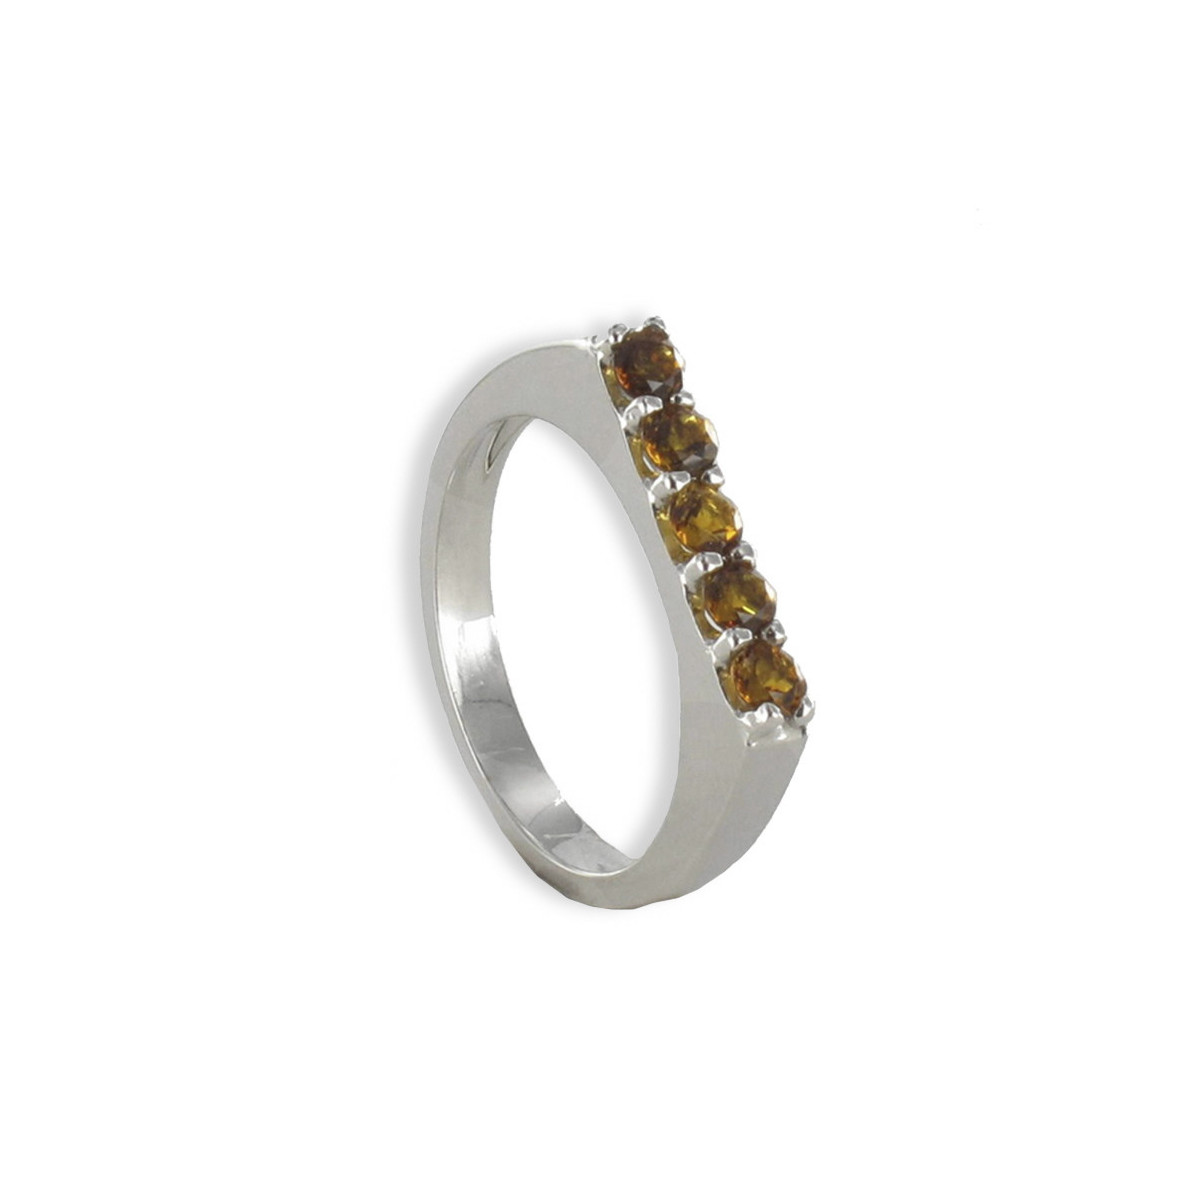 WHITE GOLD RING WITH 5 CITRINES